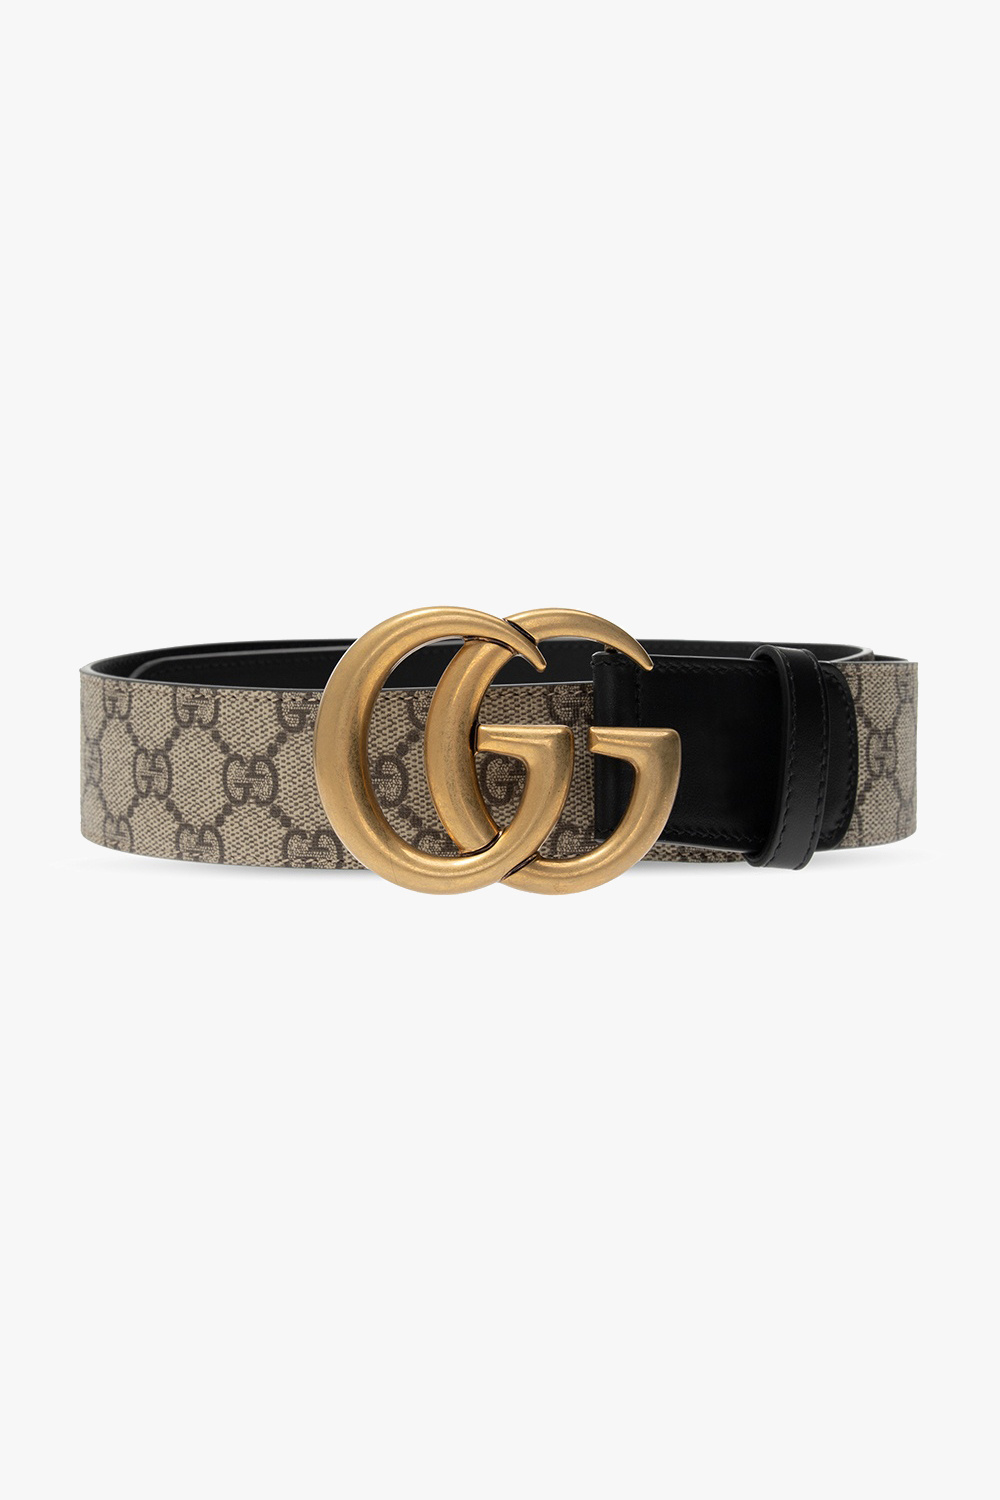 how much us a gucci belt